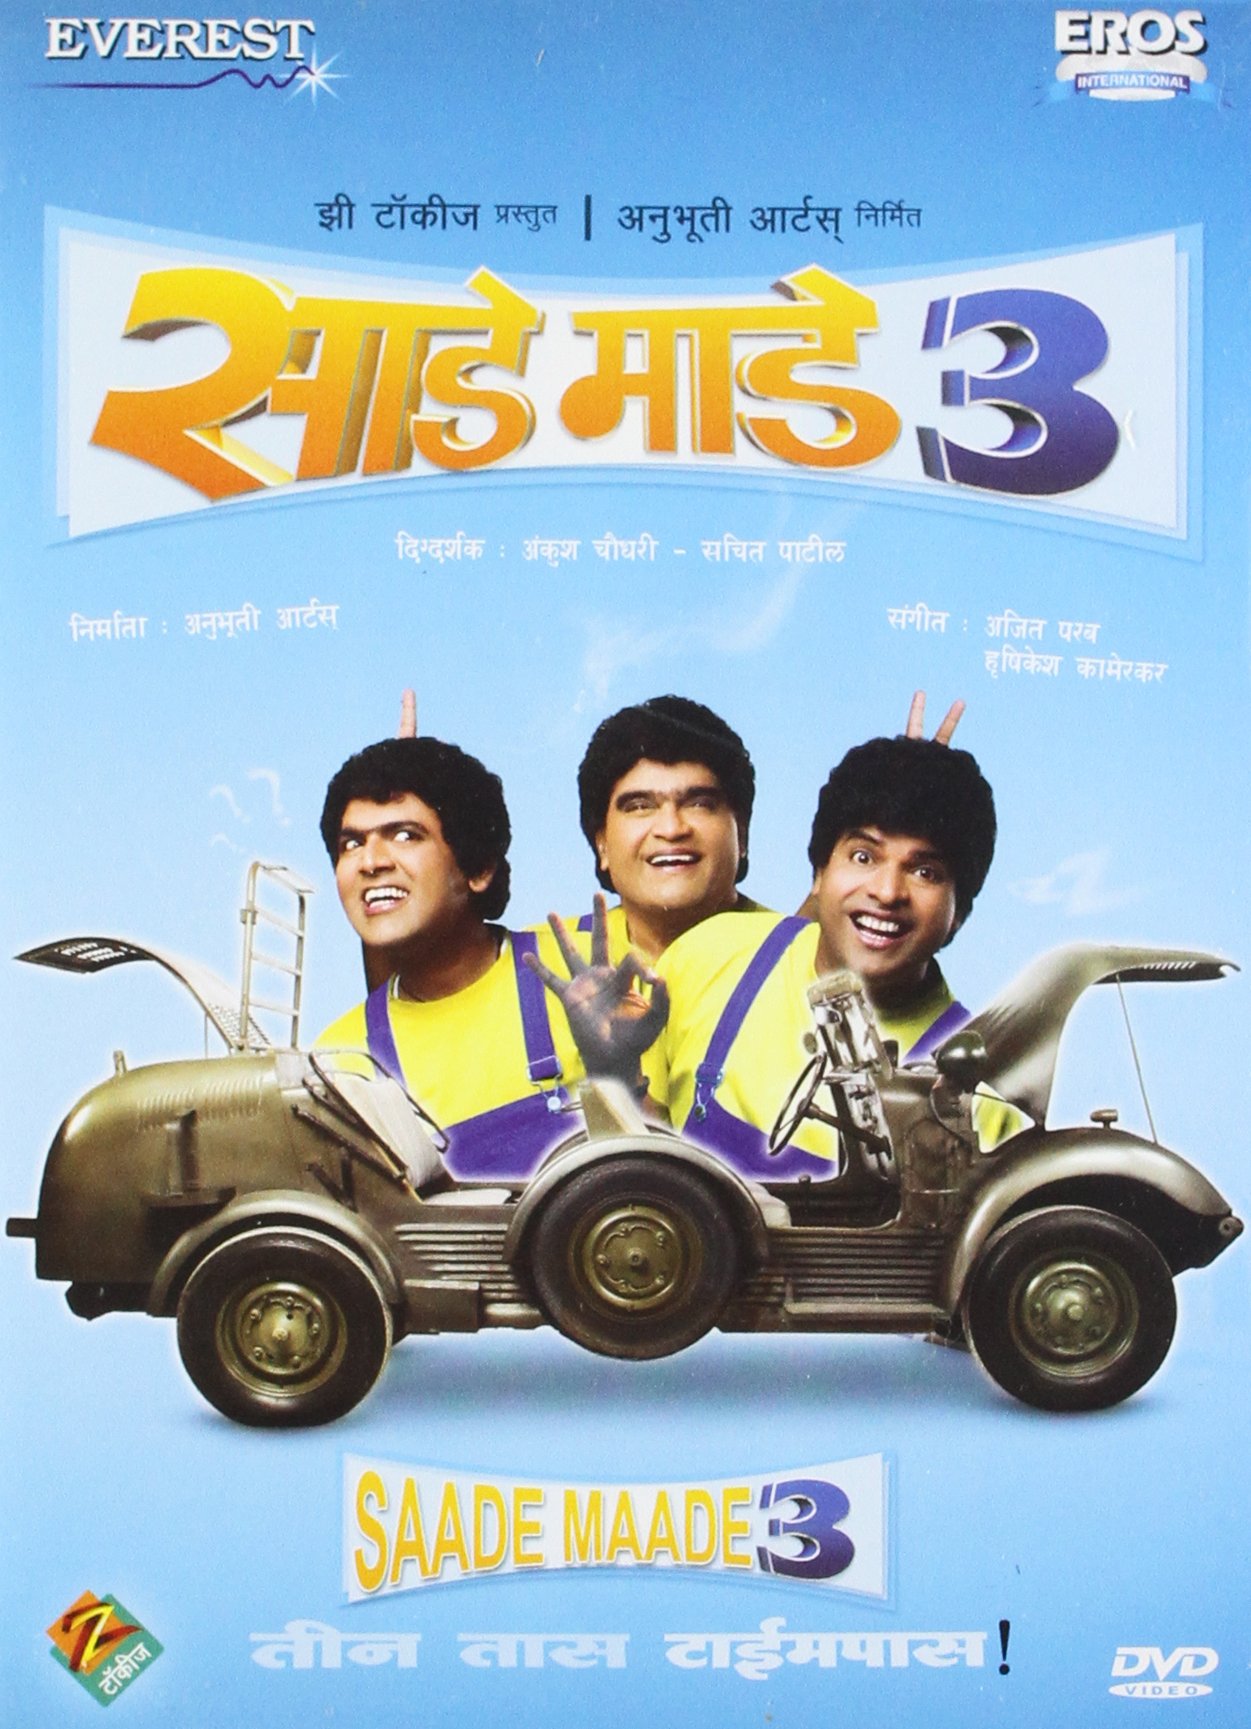 saade-maade-3-movie-purchase-or-watch-online